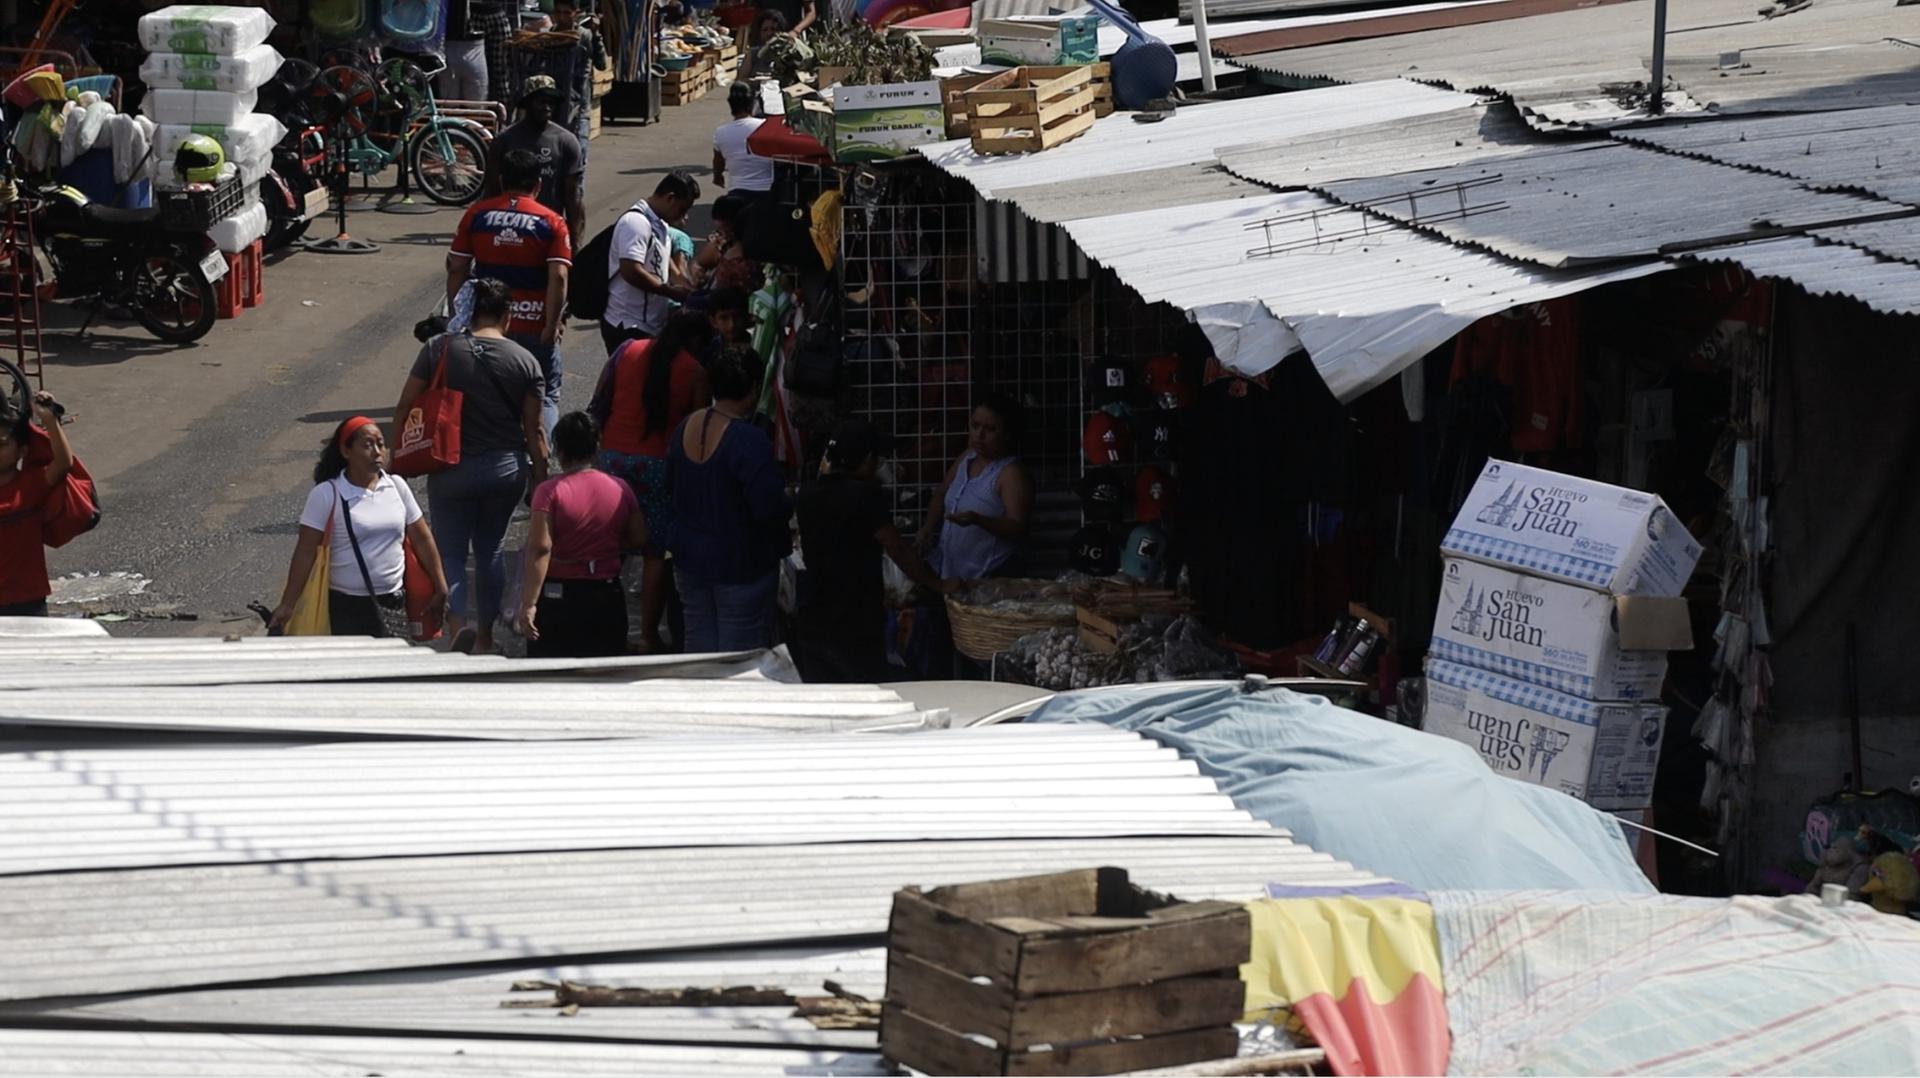 View of various people shopping at a street market in Tapachula, Mexico